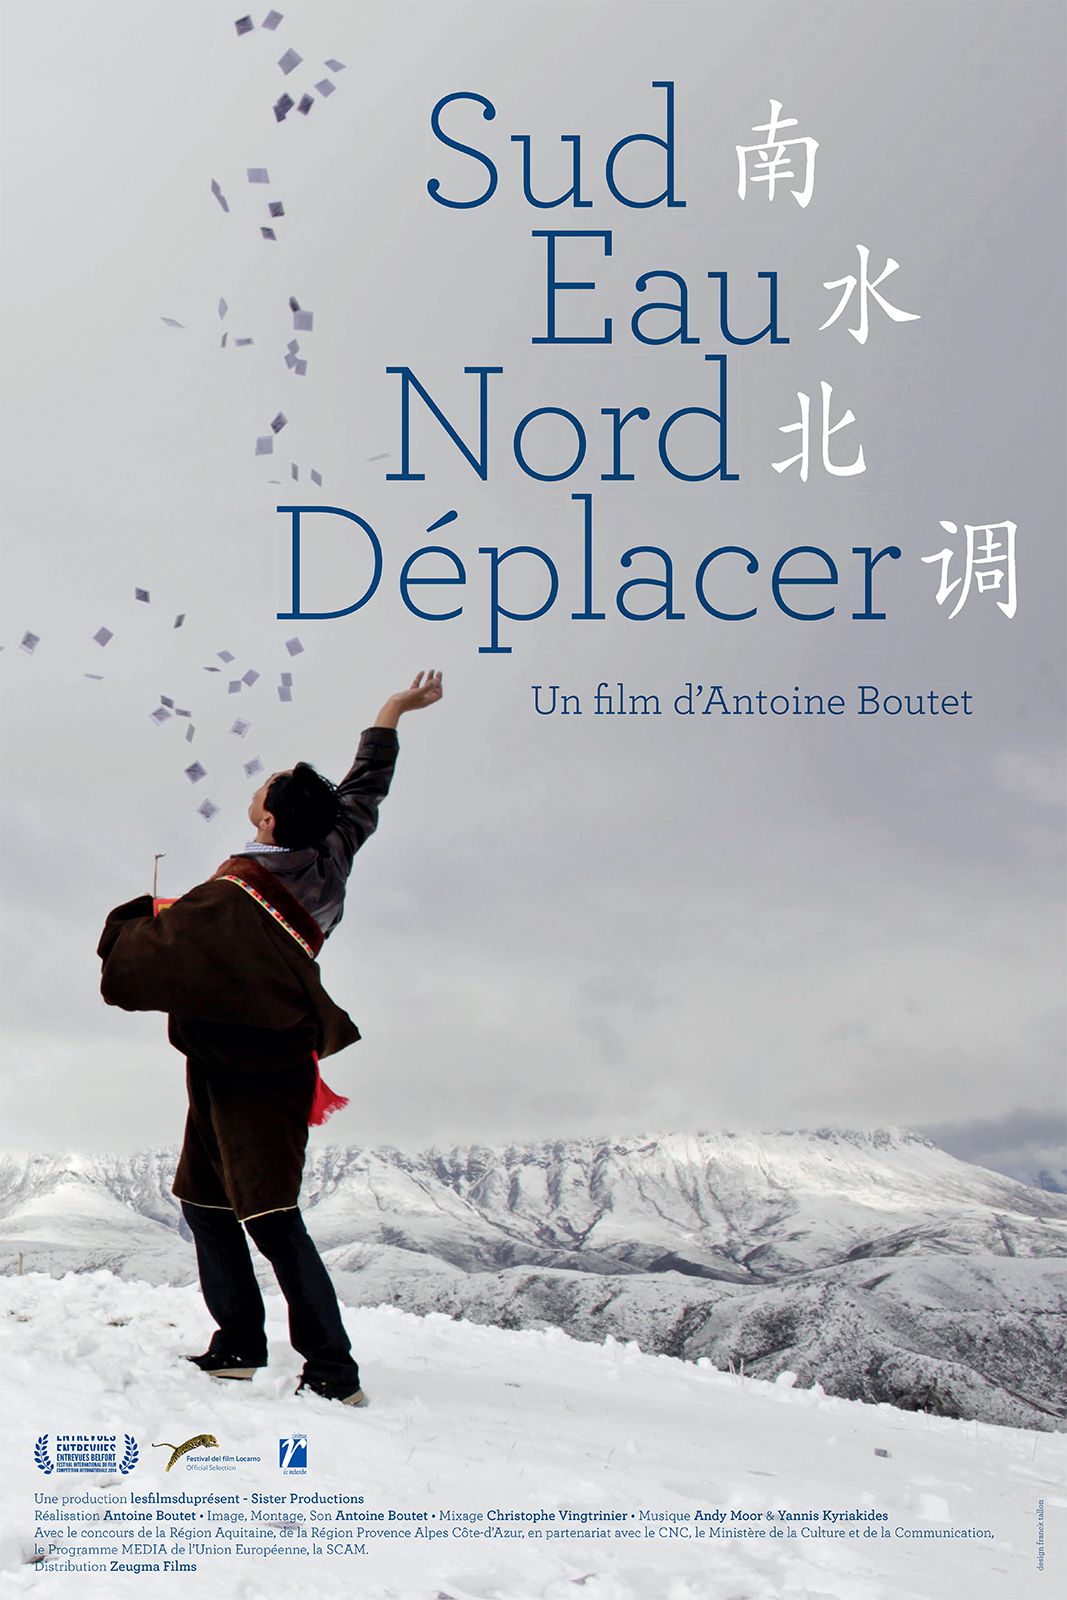 Sud eau nord déplacer - Documentaire (2015) streaming VF gratuit complet